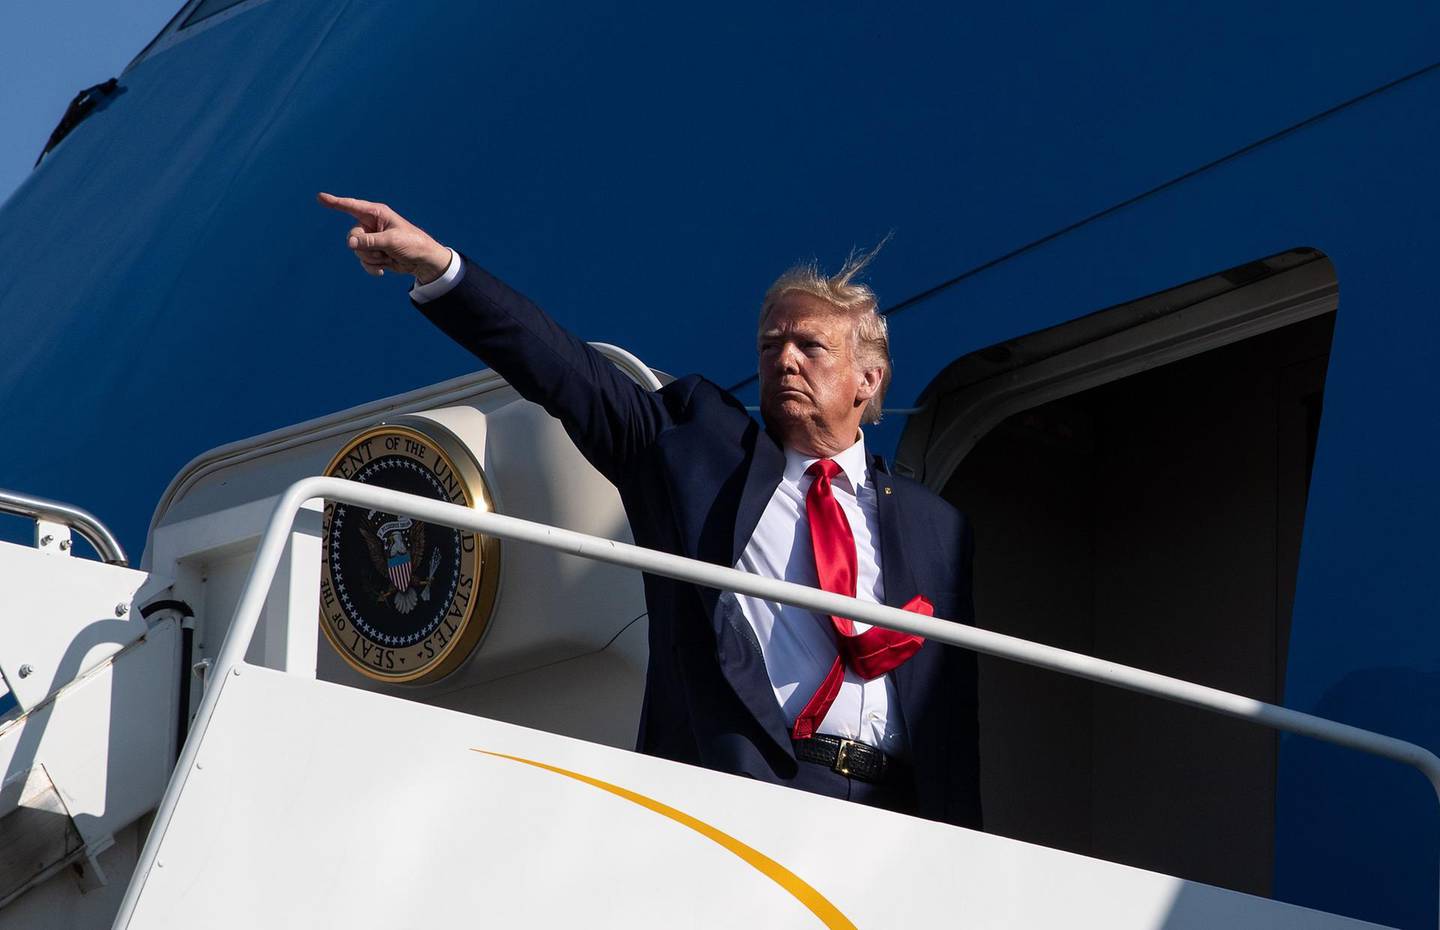 TOPSHOT - US President Donald Trump points as he boards Air Force One at Bangor International airport in Bangor, Maine, on June 5, 2020.  / AFP / NICHOLAS KAMM
